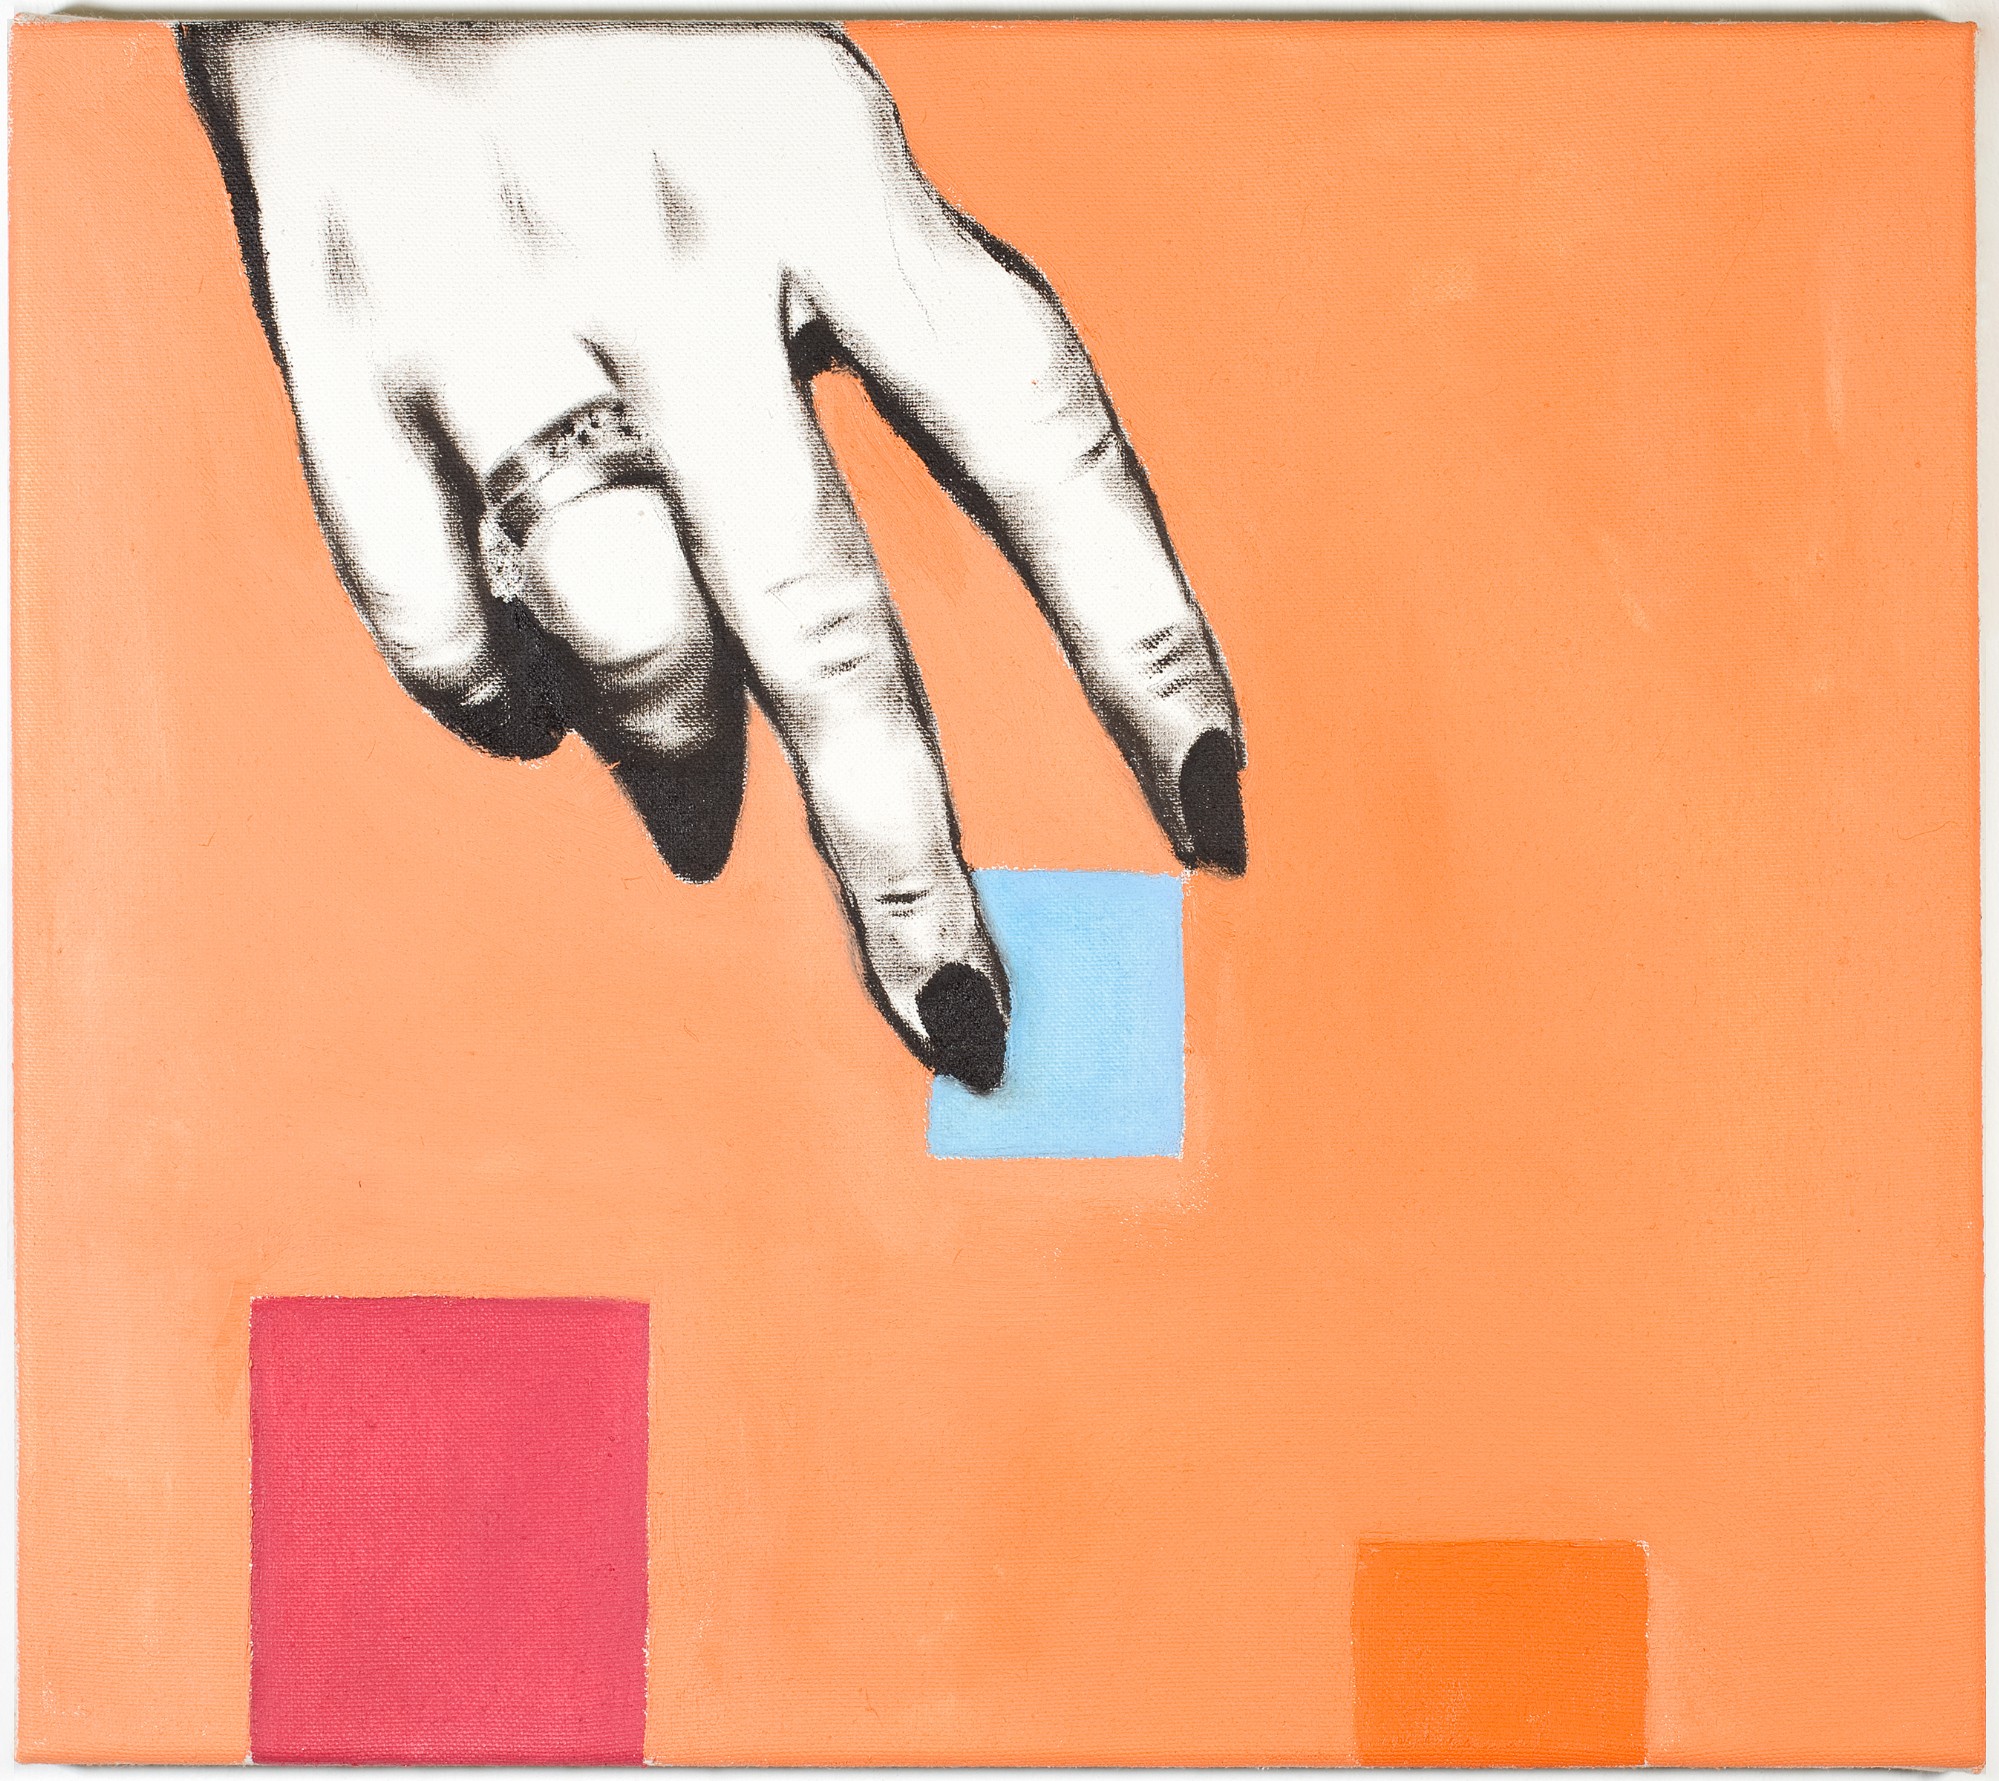 René Luckhardt, Untitled hand with applications, 2014, oil on canvas, 38 x 42 cm